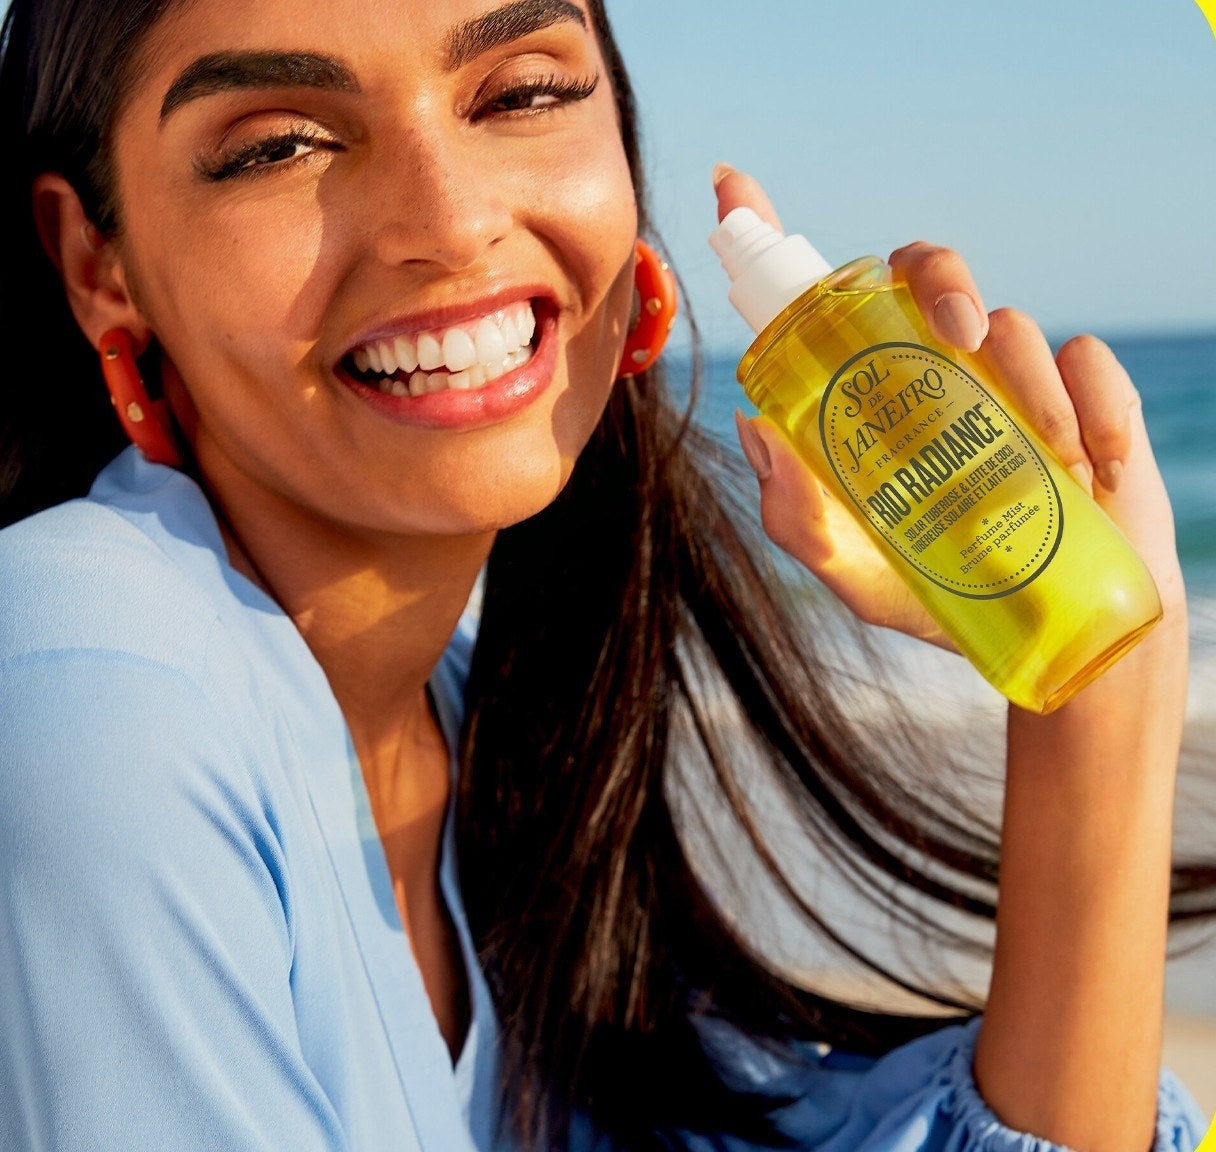 a smiling person holding up a bottle of the sol de janeiro perfume mist